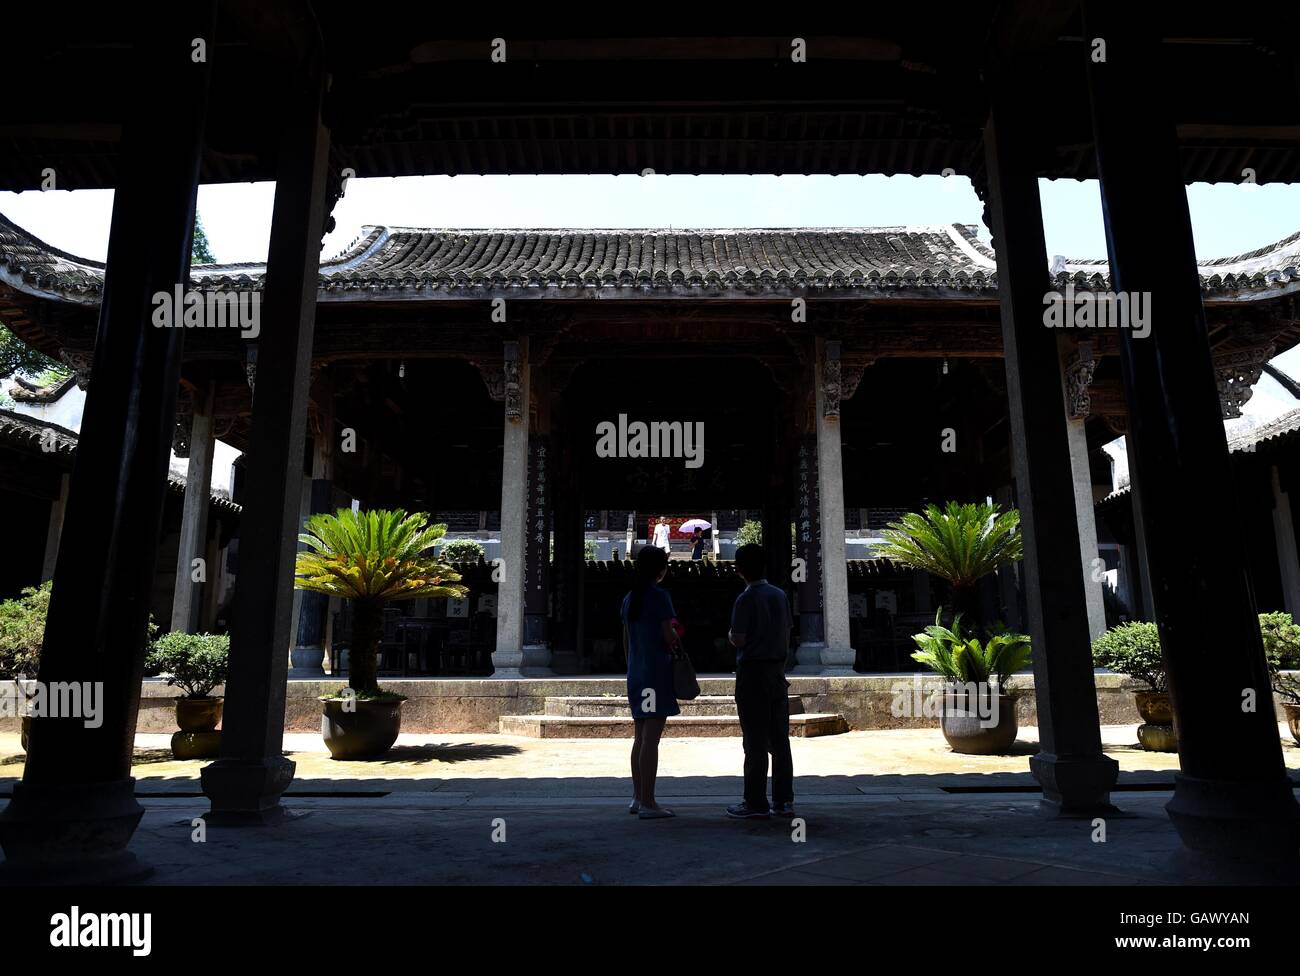 (160706) -- LANXI, July 6, 2016 (Xinhua) -- Tourists visit an ancestral hall in Zhuge Village in Lanxi City, east China's Zhejiang Province, July 5, 2016. The Zhuge Village, which has more than 660 years of history, is home to descendents of Zhuge Liang, an important military strategist and inventor serving as the Prime Minister of the Shu Kingdom in the period of the Three Kingdoms (220-265). The village was designed and constructed by Zhuge Dashi, 27th descendant of Zhuge Liang, following the design of the Bagua (Eight Diagrams) principles of Fengshui. (Xinhua/Han Chuanhao) (lfj) Stock Photo